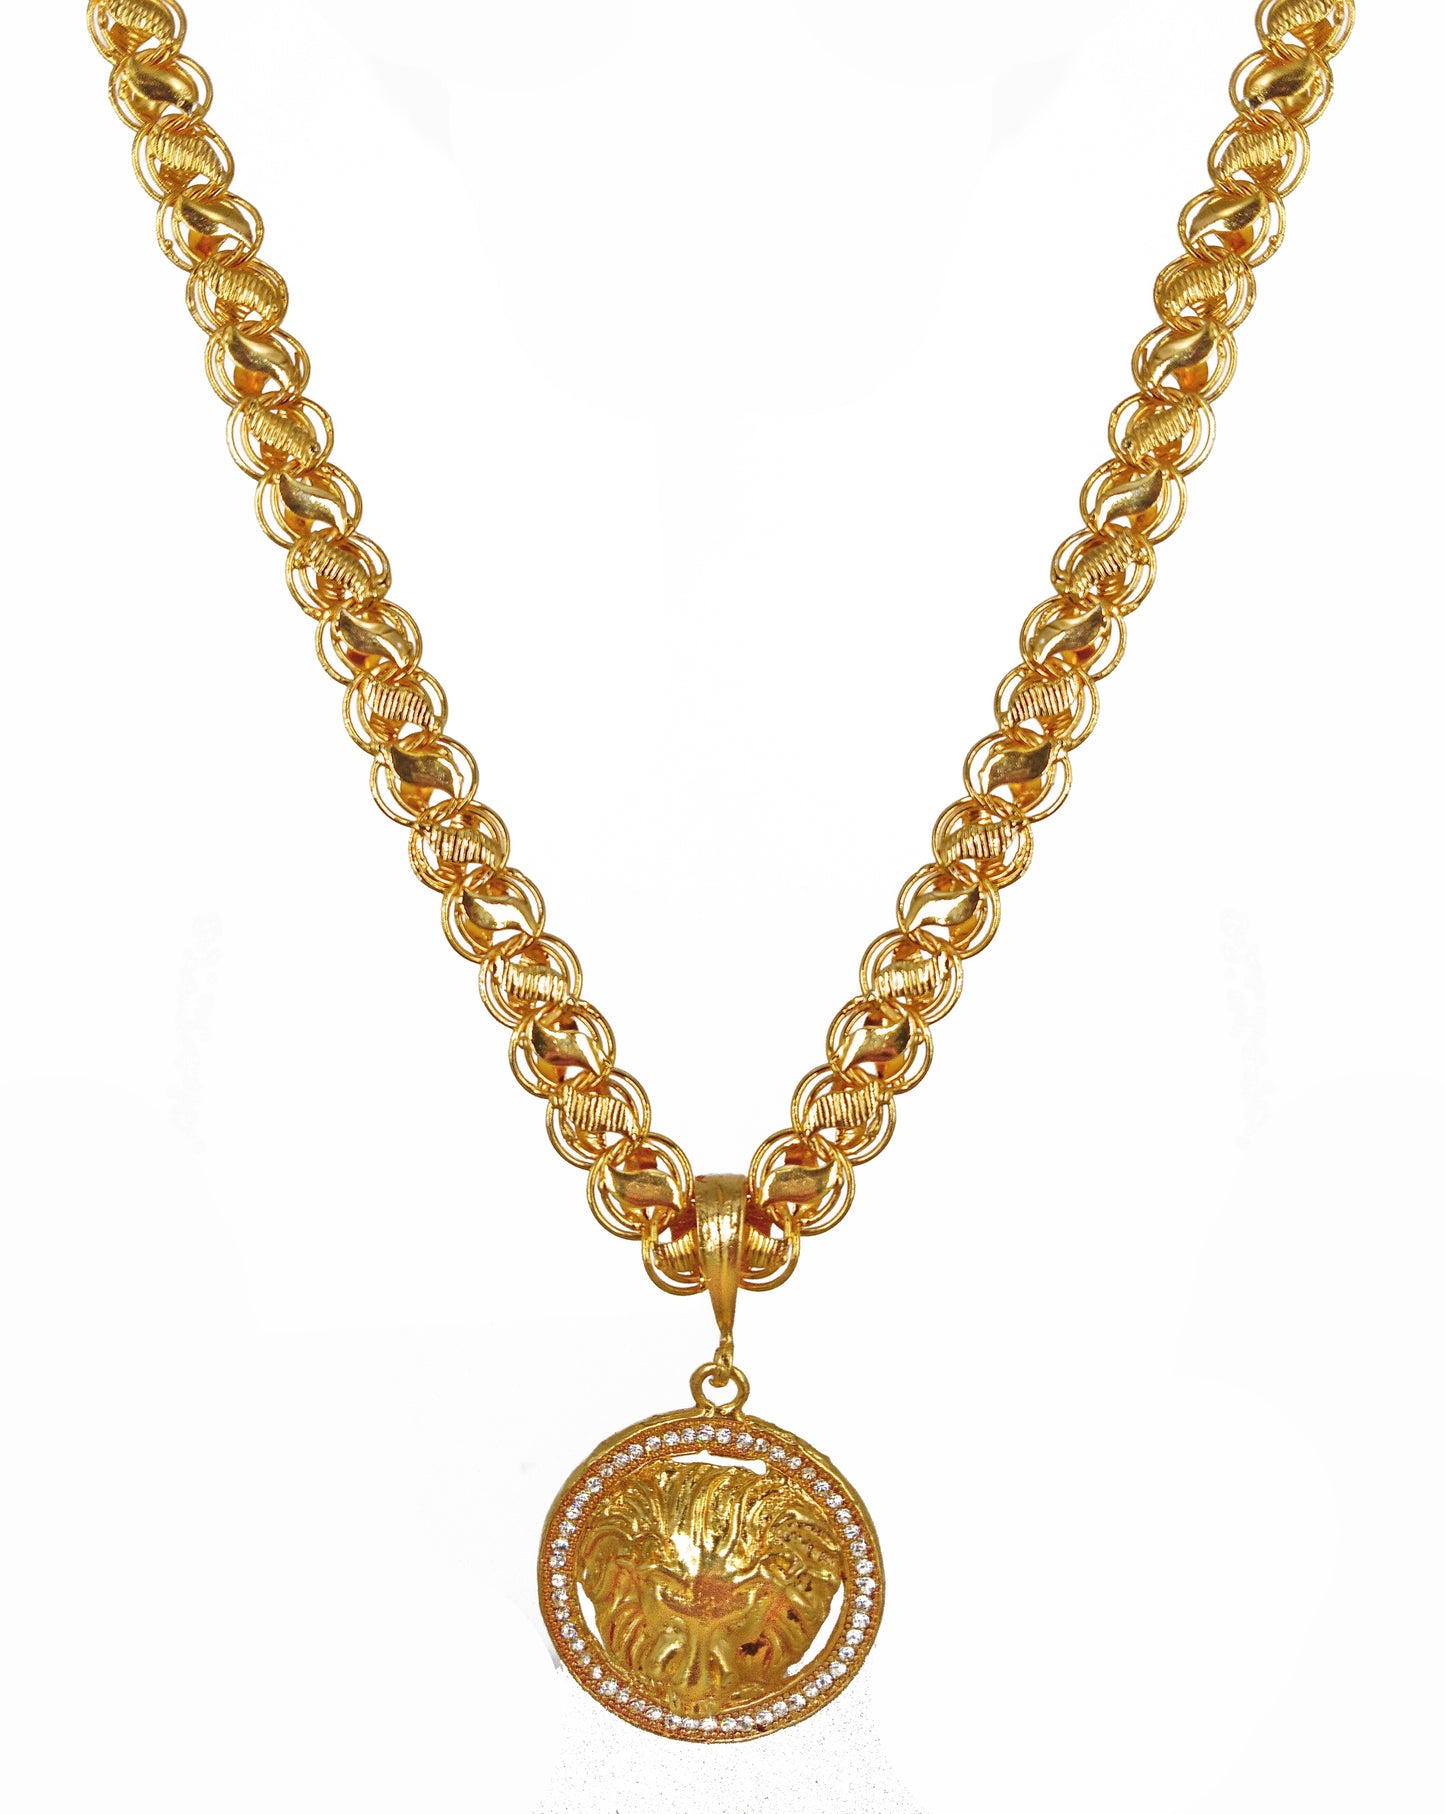 Luxurious Men's Gold Plated Lion Pendant With Chain